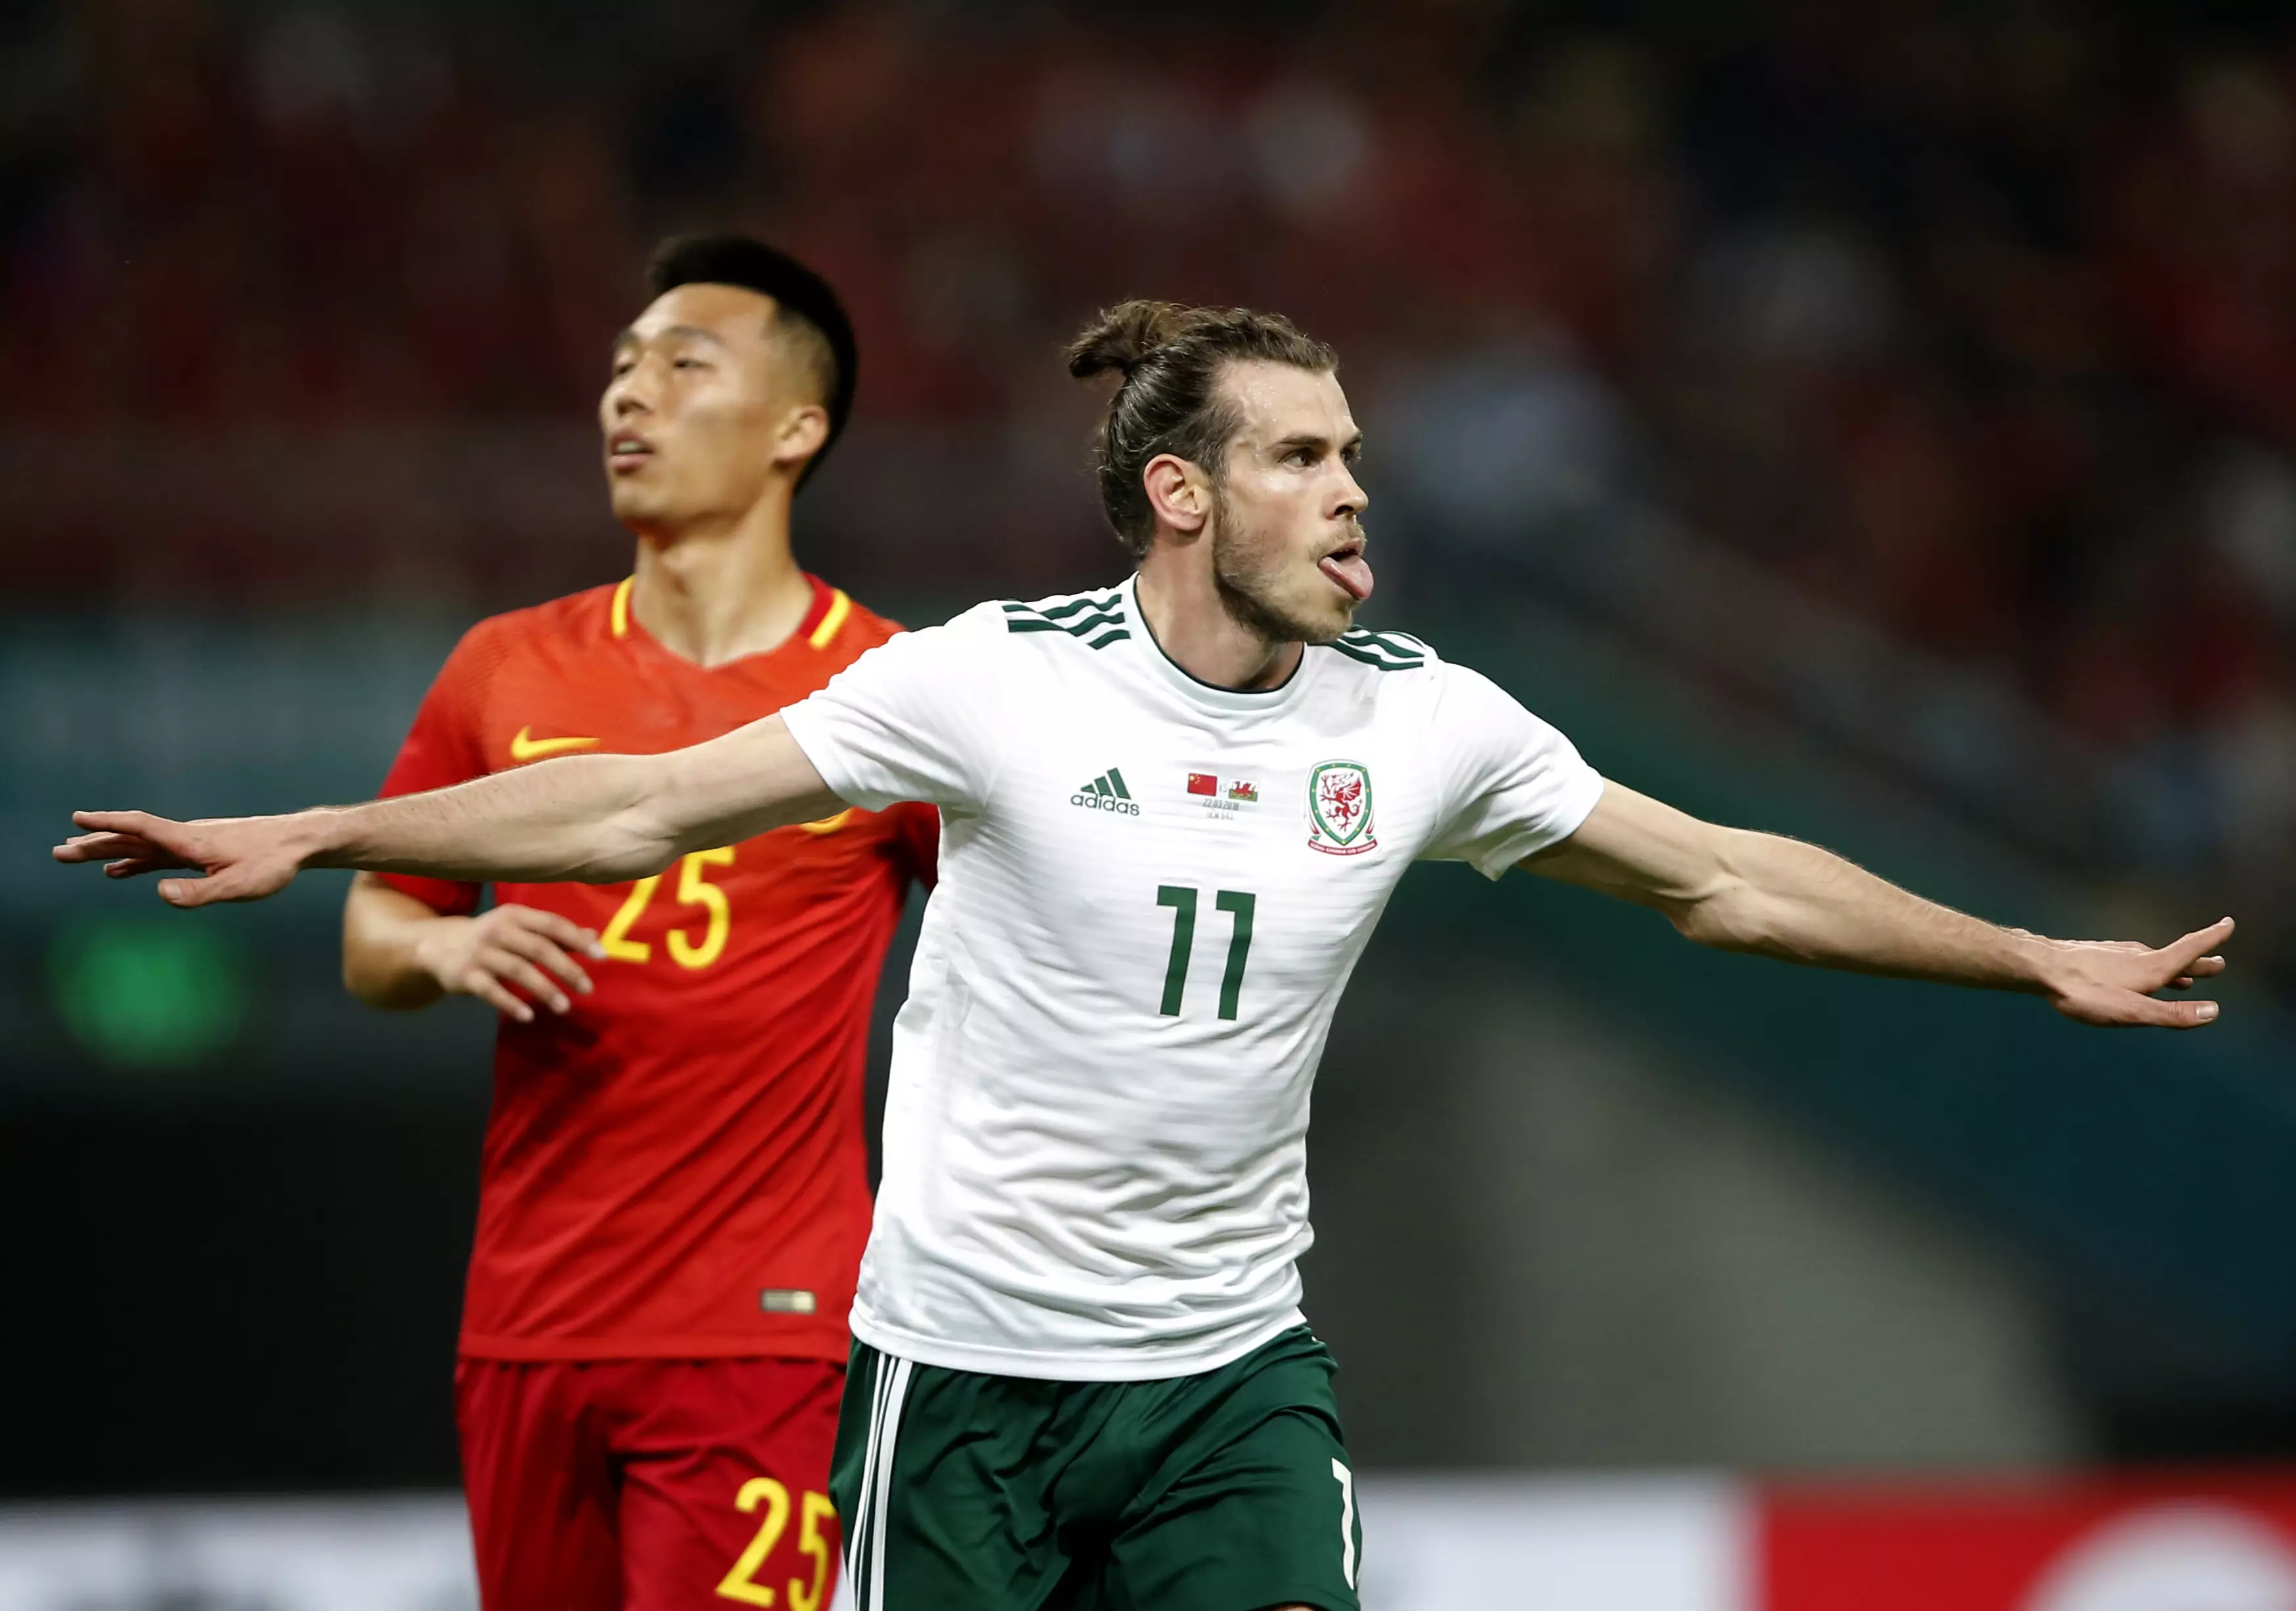 Bale is loved in China, even after scoring a hat-trick against their national team last week. Image: PA Images